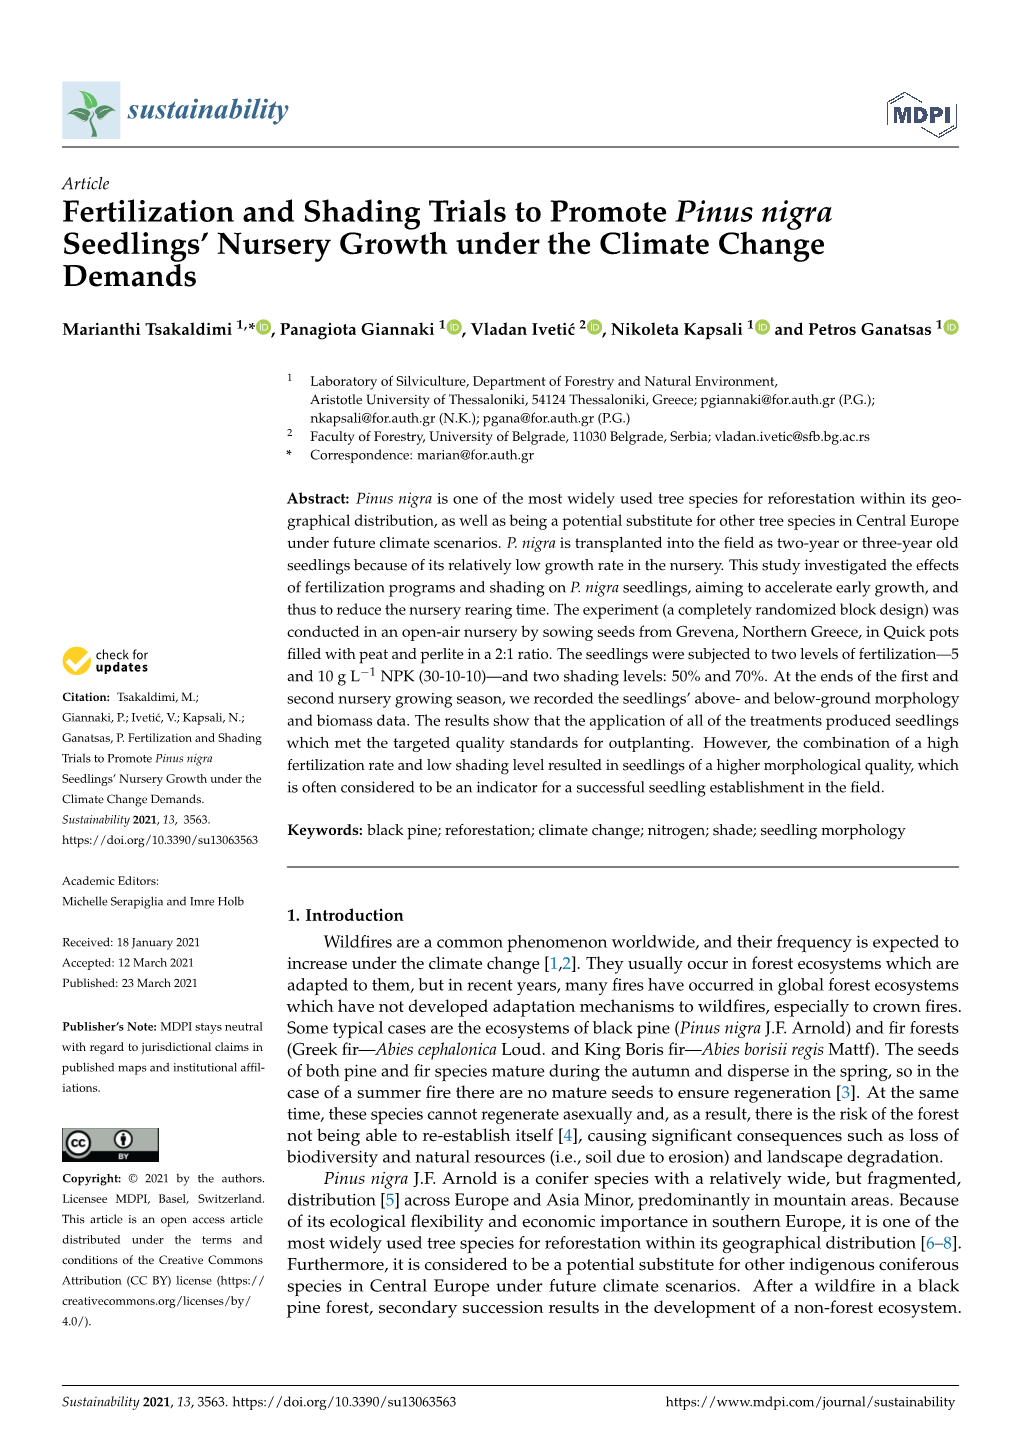 Fertilization and Shading Trials to Promote Pinus Nigra Seedlings’ Nursery Growth Under the Climate Change Demands